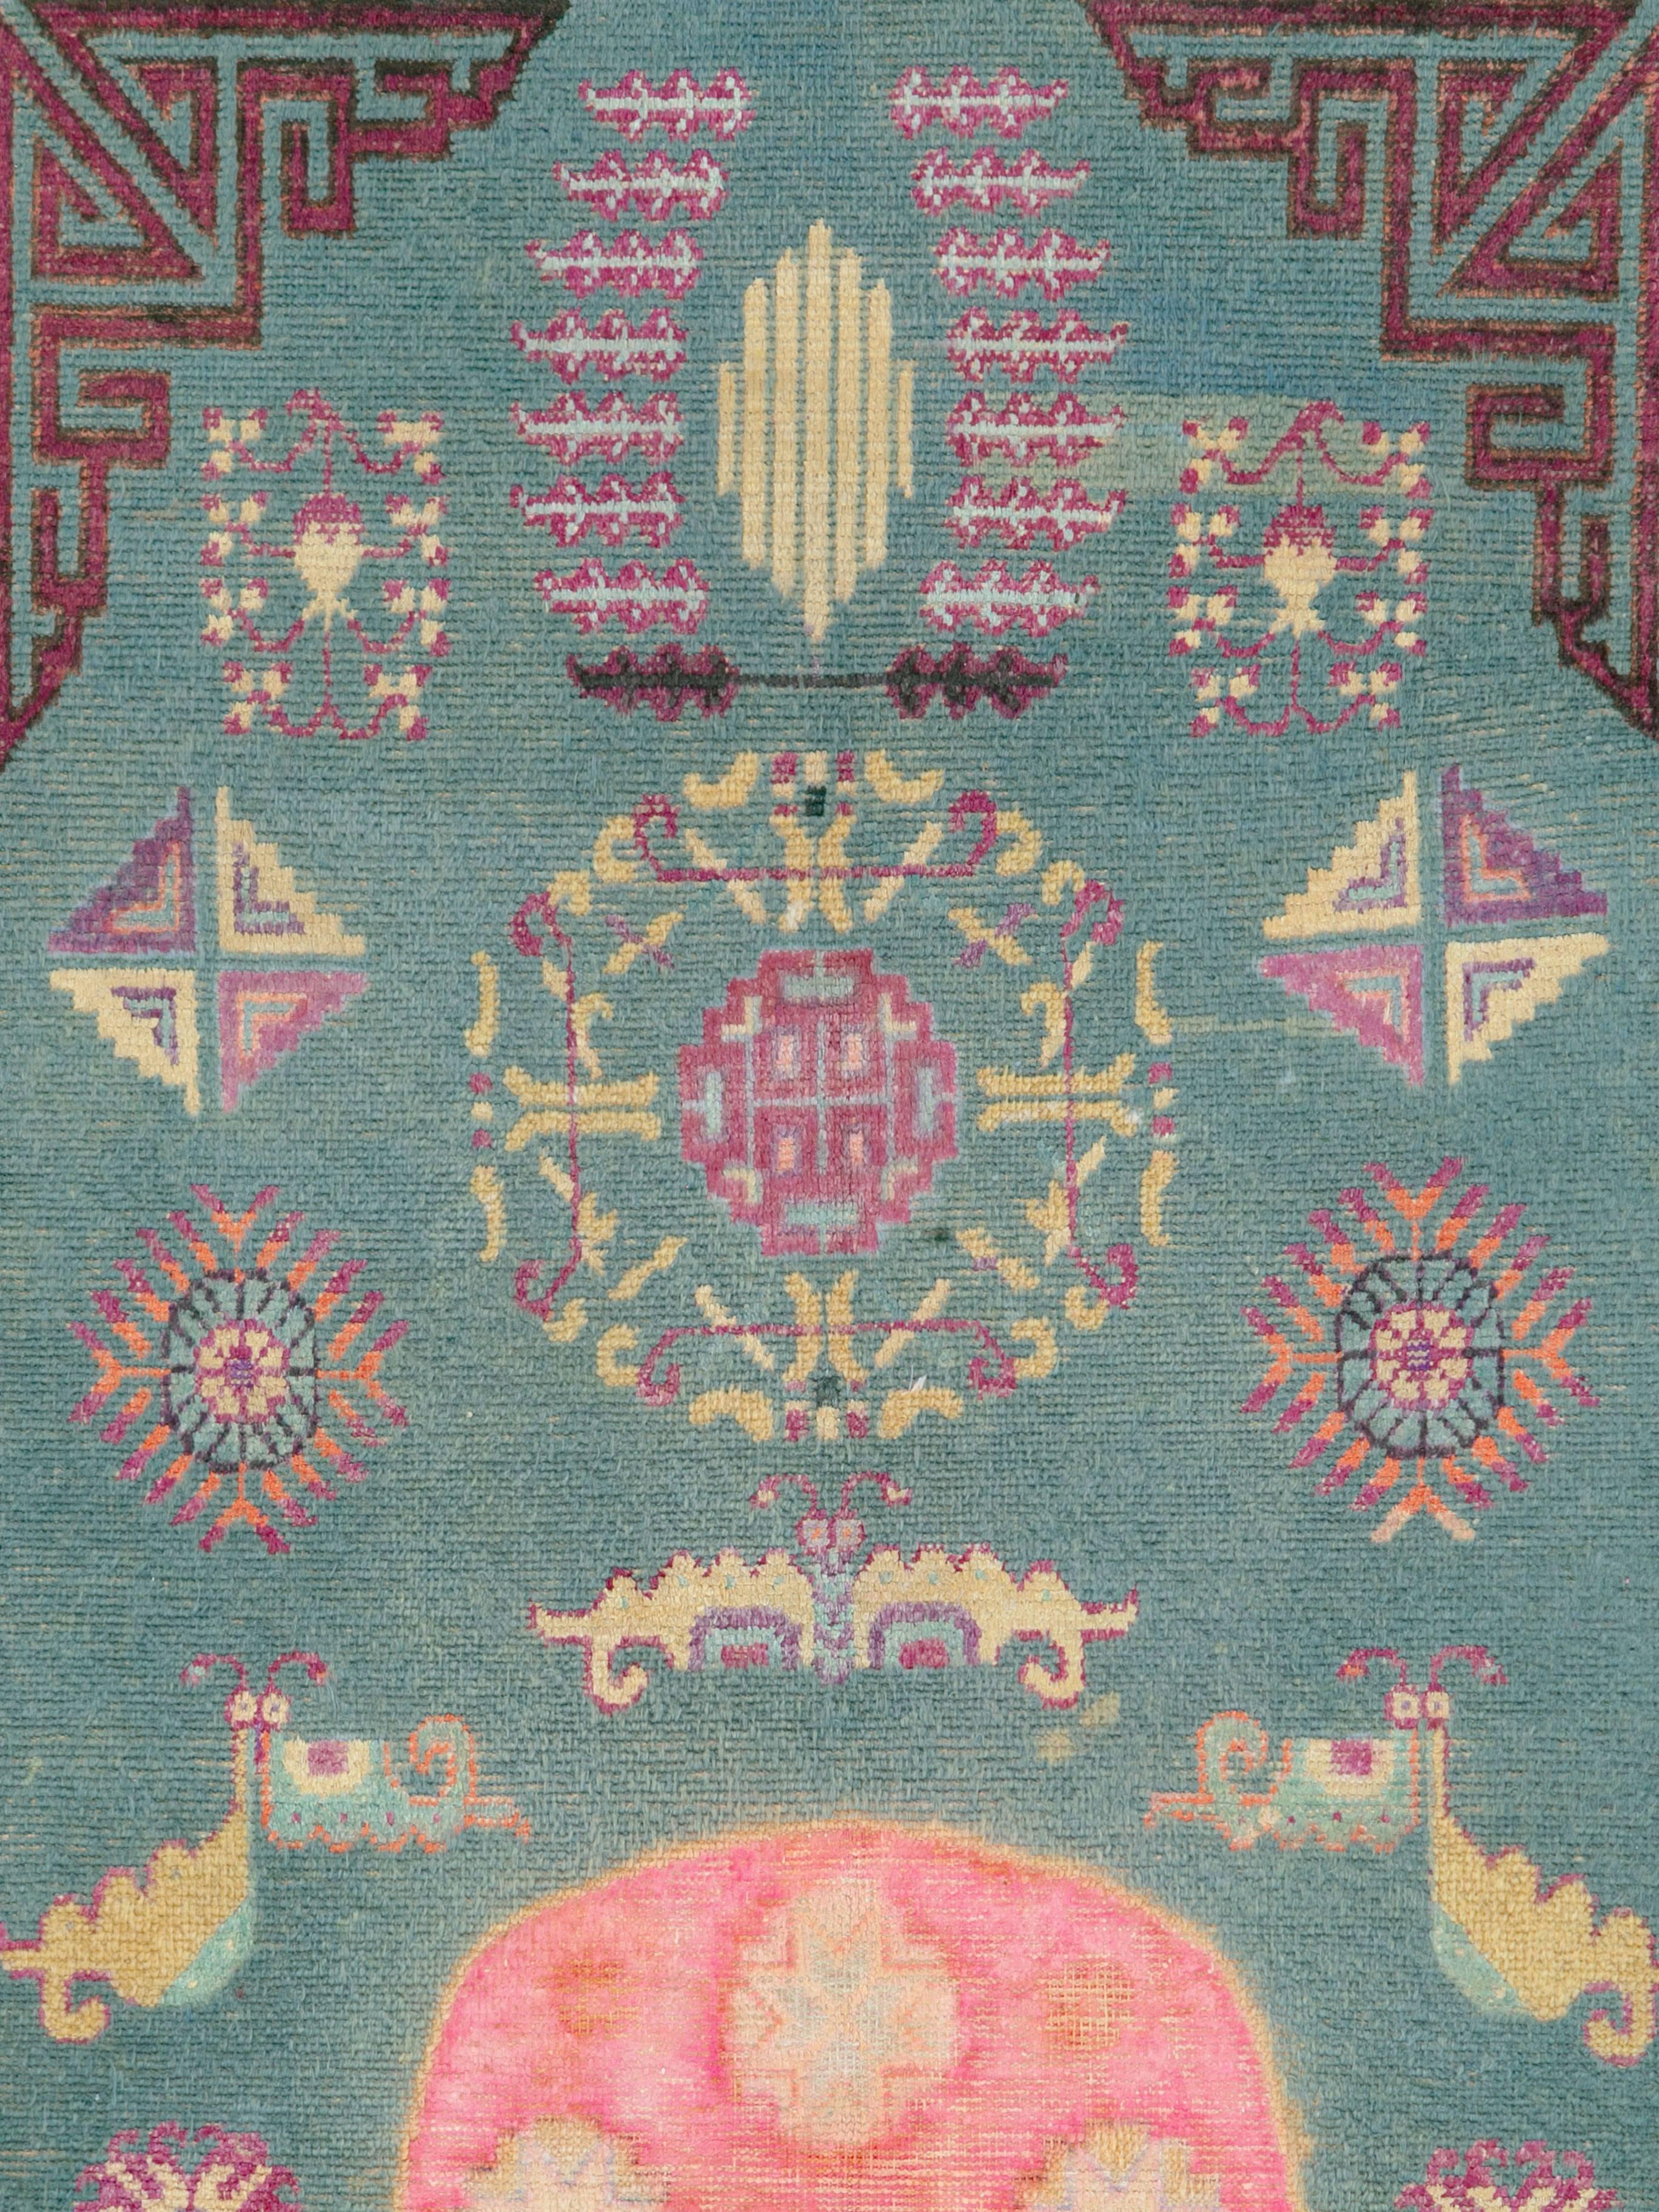 An antique Khotan rug from East Turkestan woven during the first quarter of the 20th century.